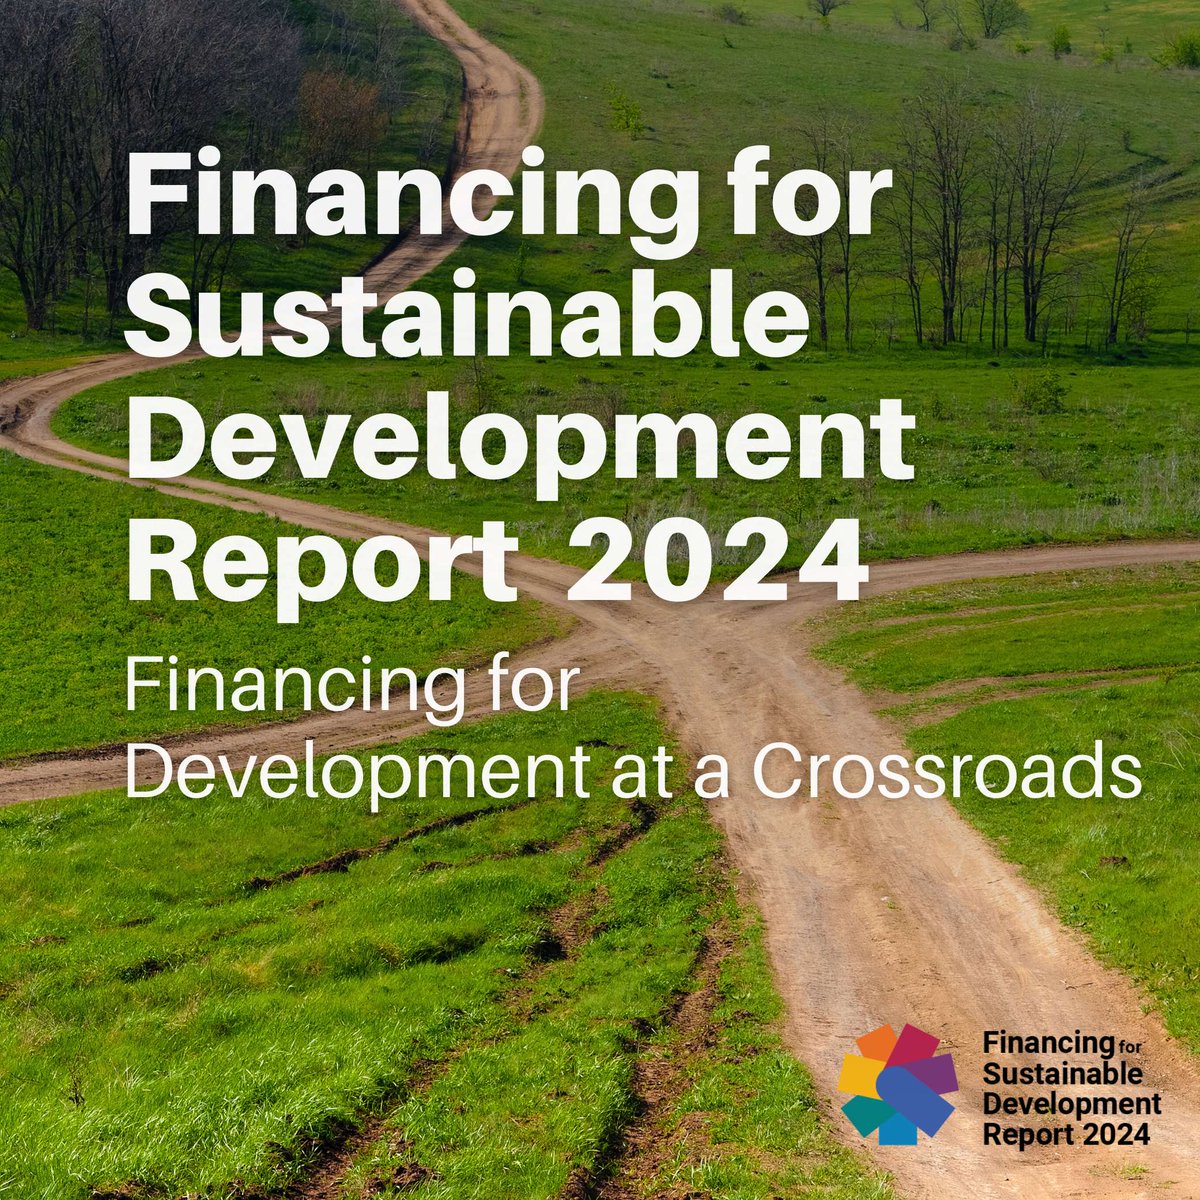 The world is severely off track to achieve the #GlobalGoals by 2030, and financing is at the heart of the problem.

New @UN Inter-agency Task Force on Financing for Development report calls for action on several fronts for #FinancingOurFuture: financing.desa.un.org/iatf/report/fi…